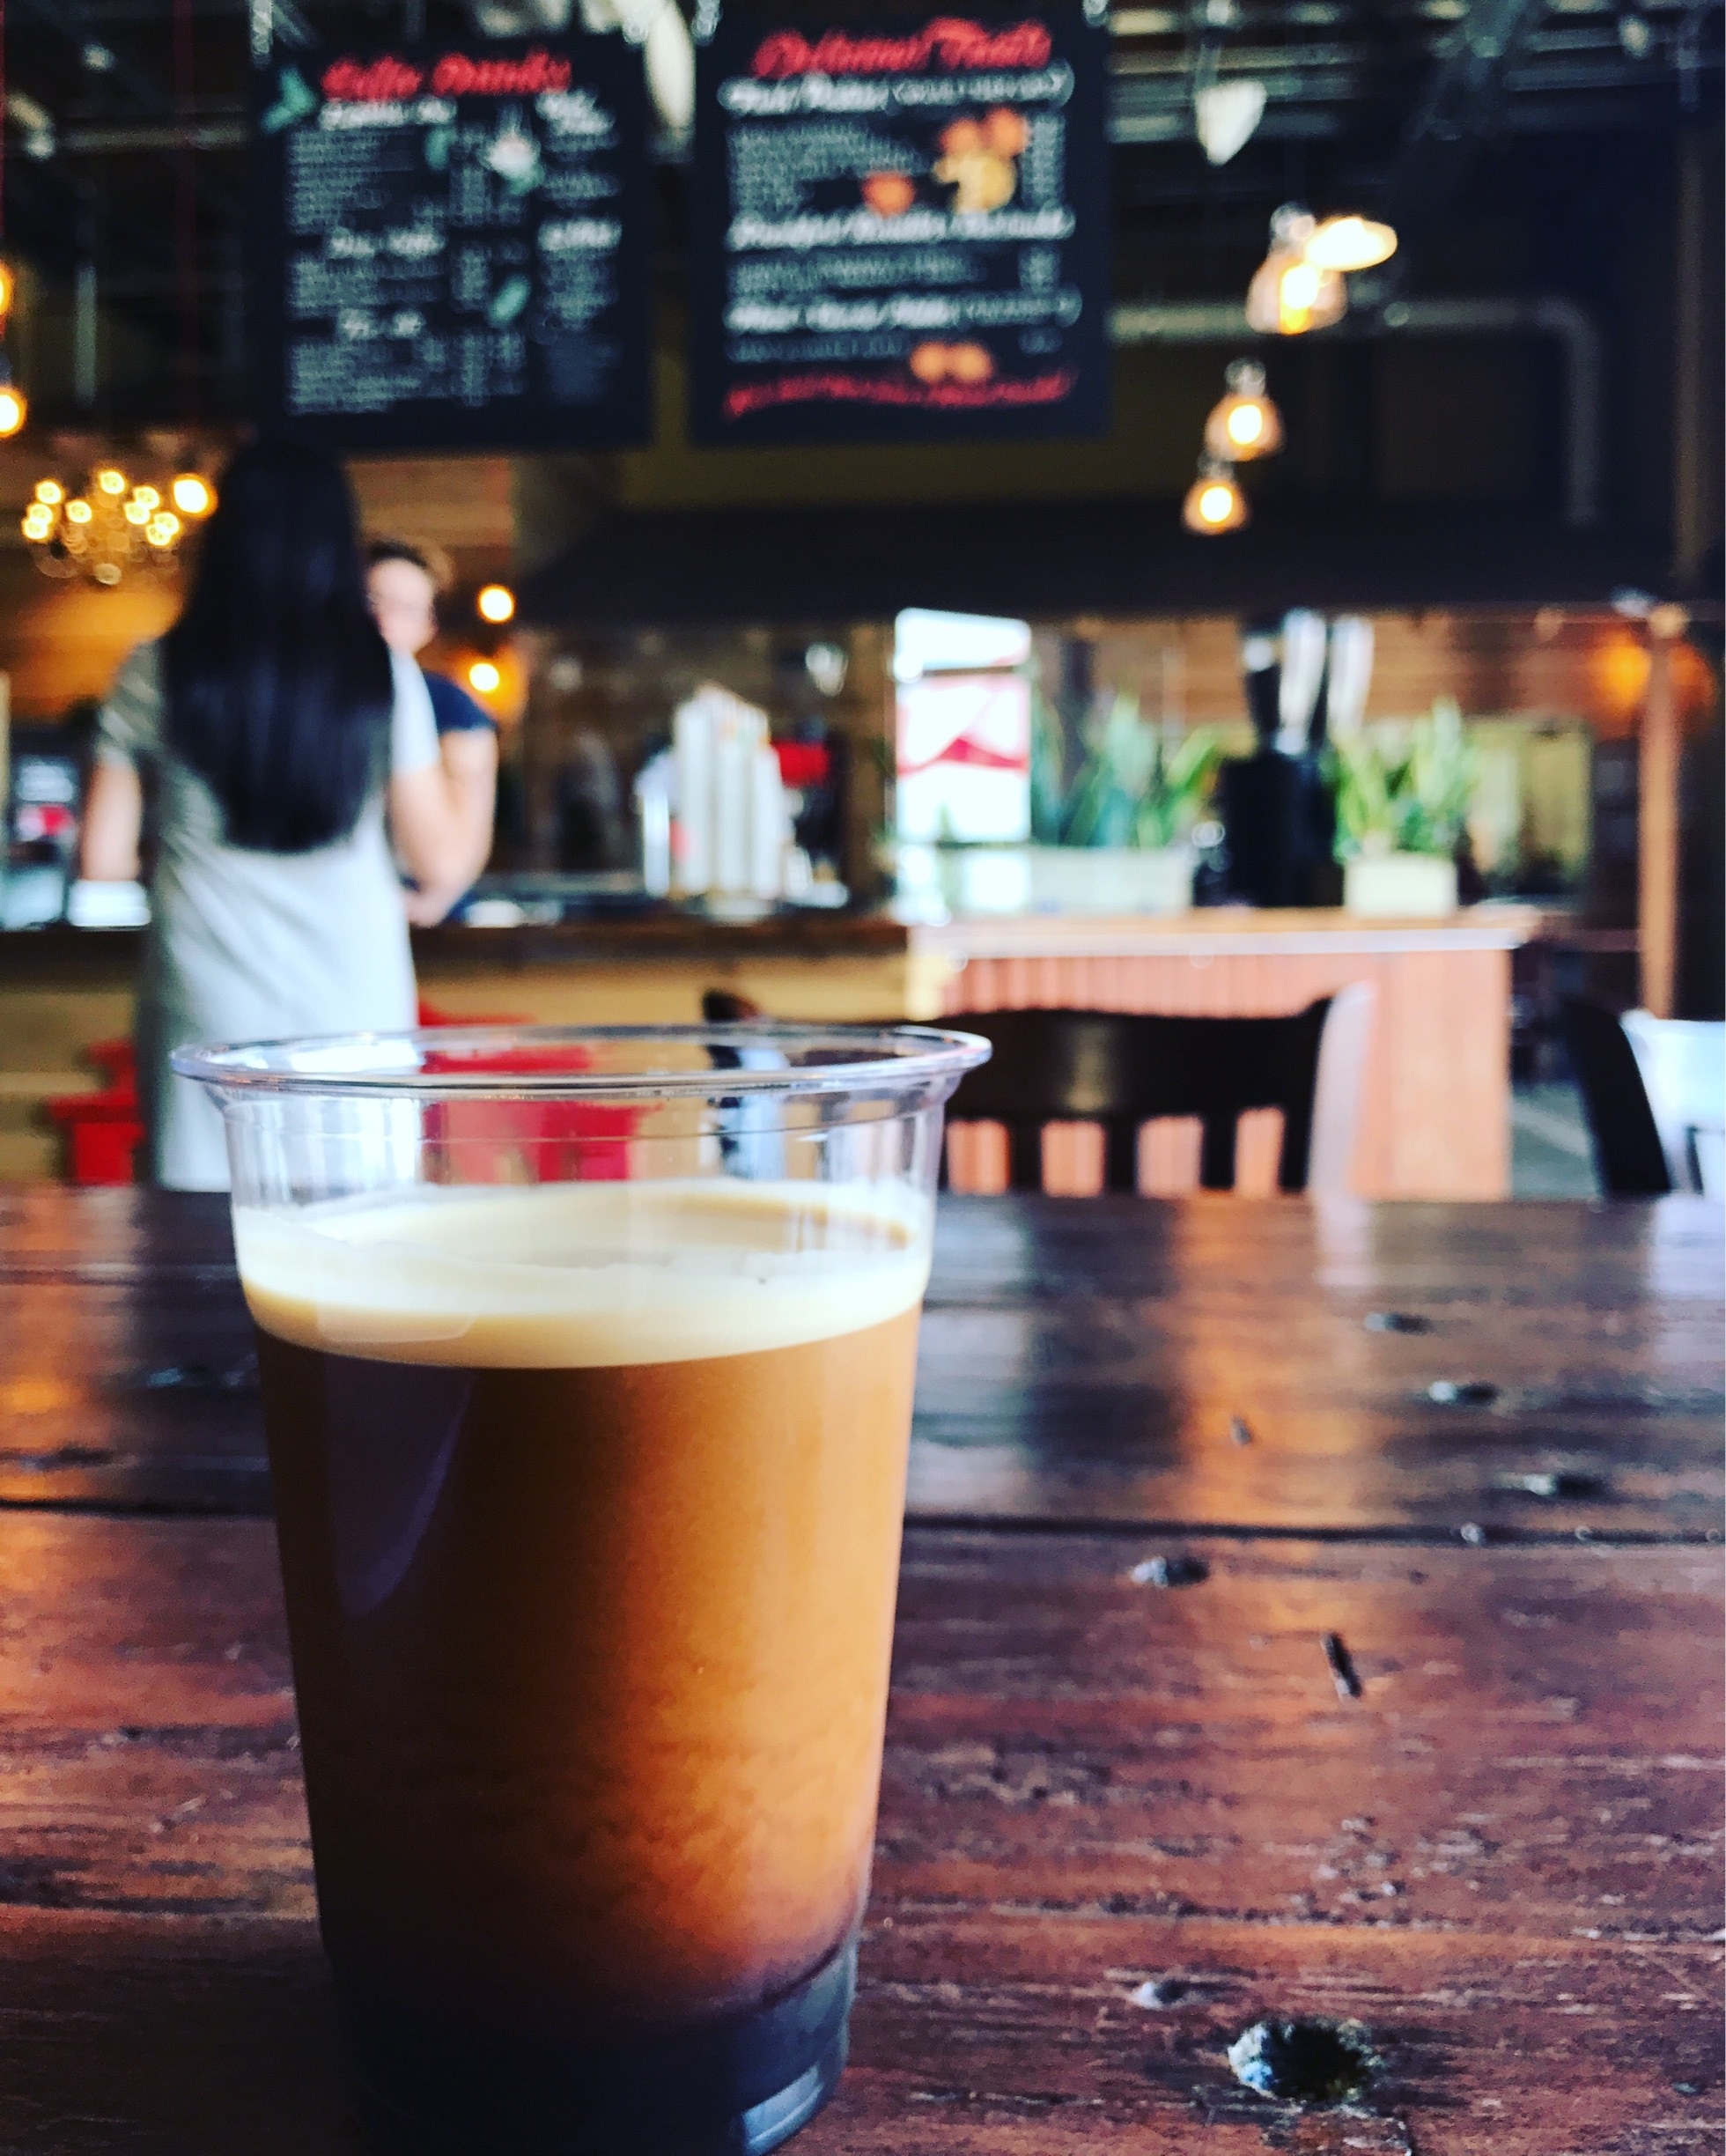 I found Logan House and their Nitro Cold Brew (cold brew coffee infused with nitrogen) at The Stanley Market in Denver today. Great atmosphere and this brew was definitely on point. 